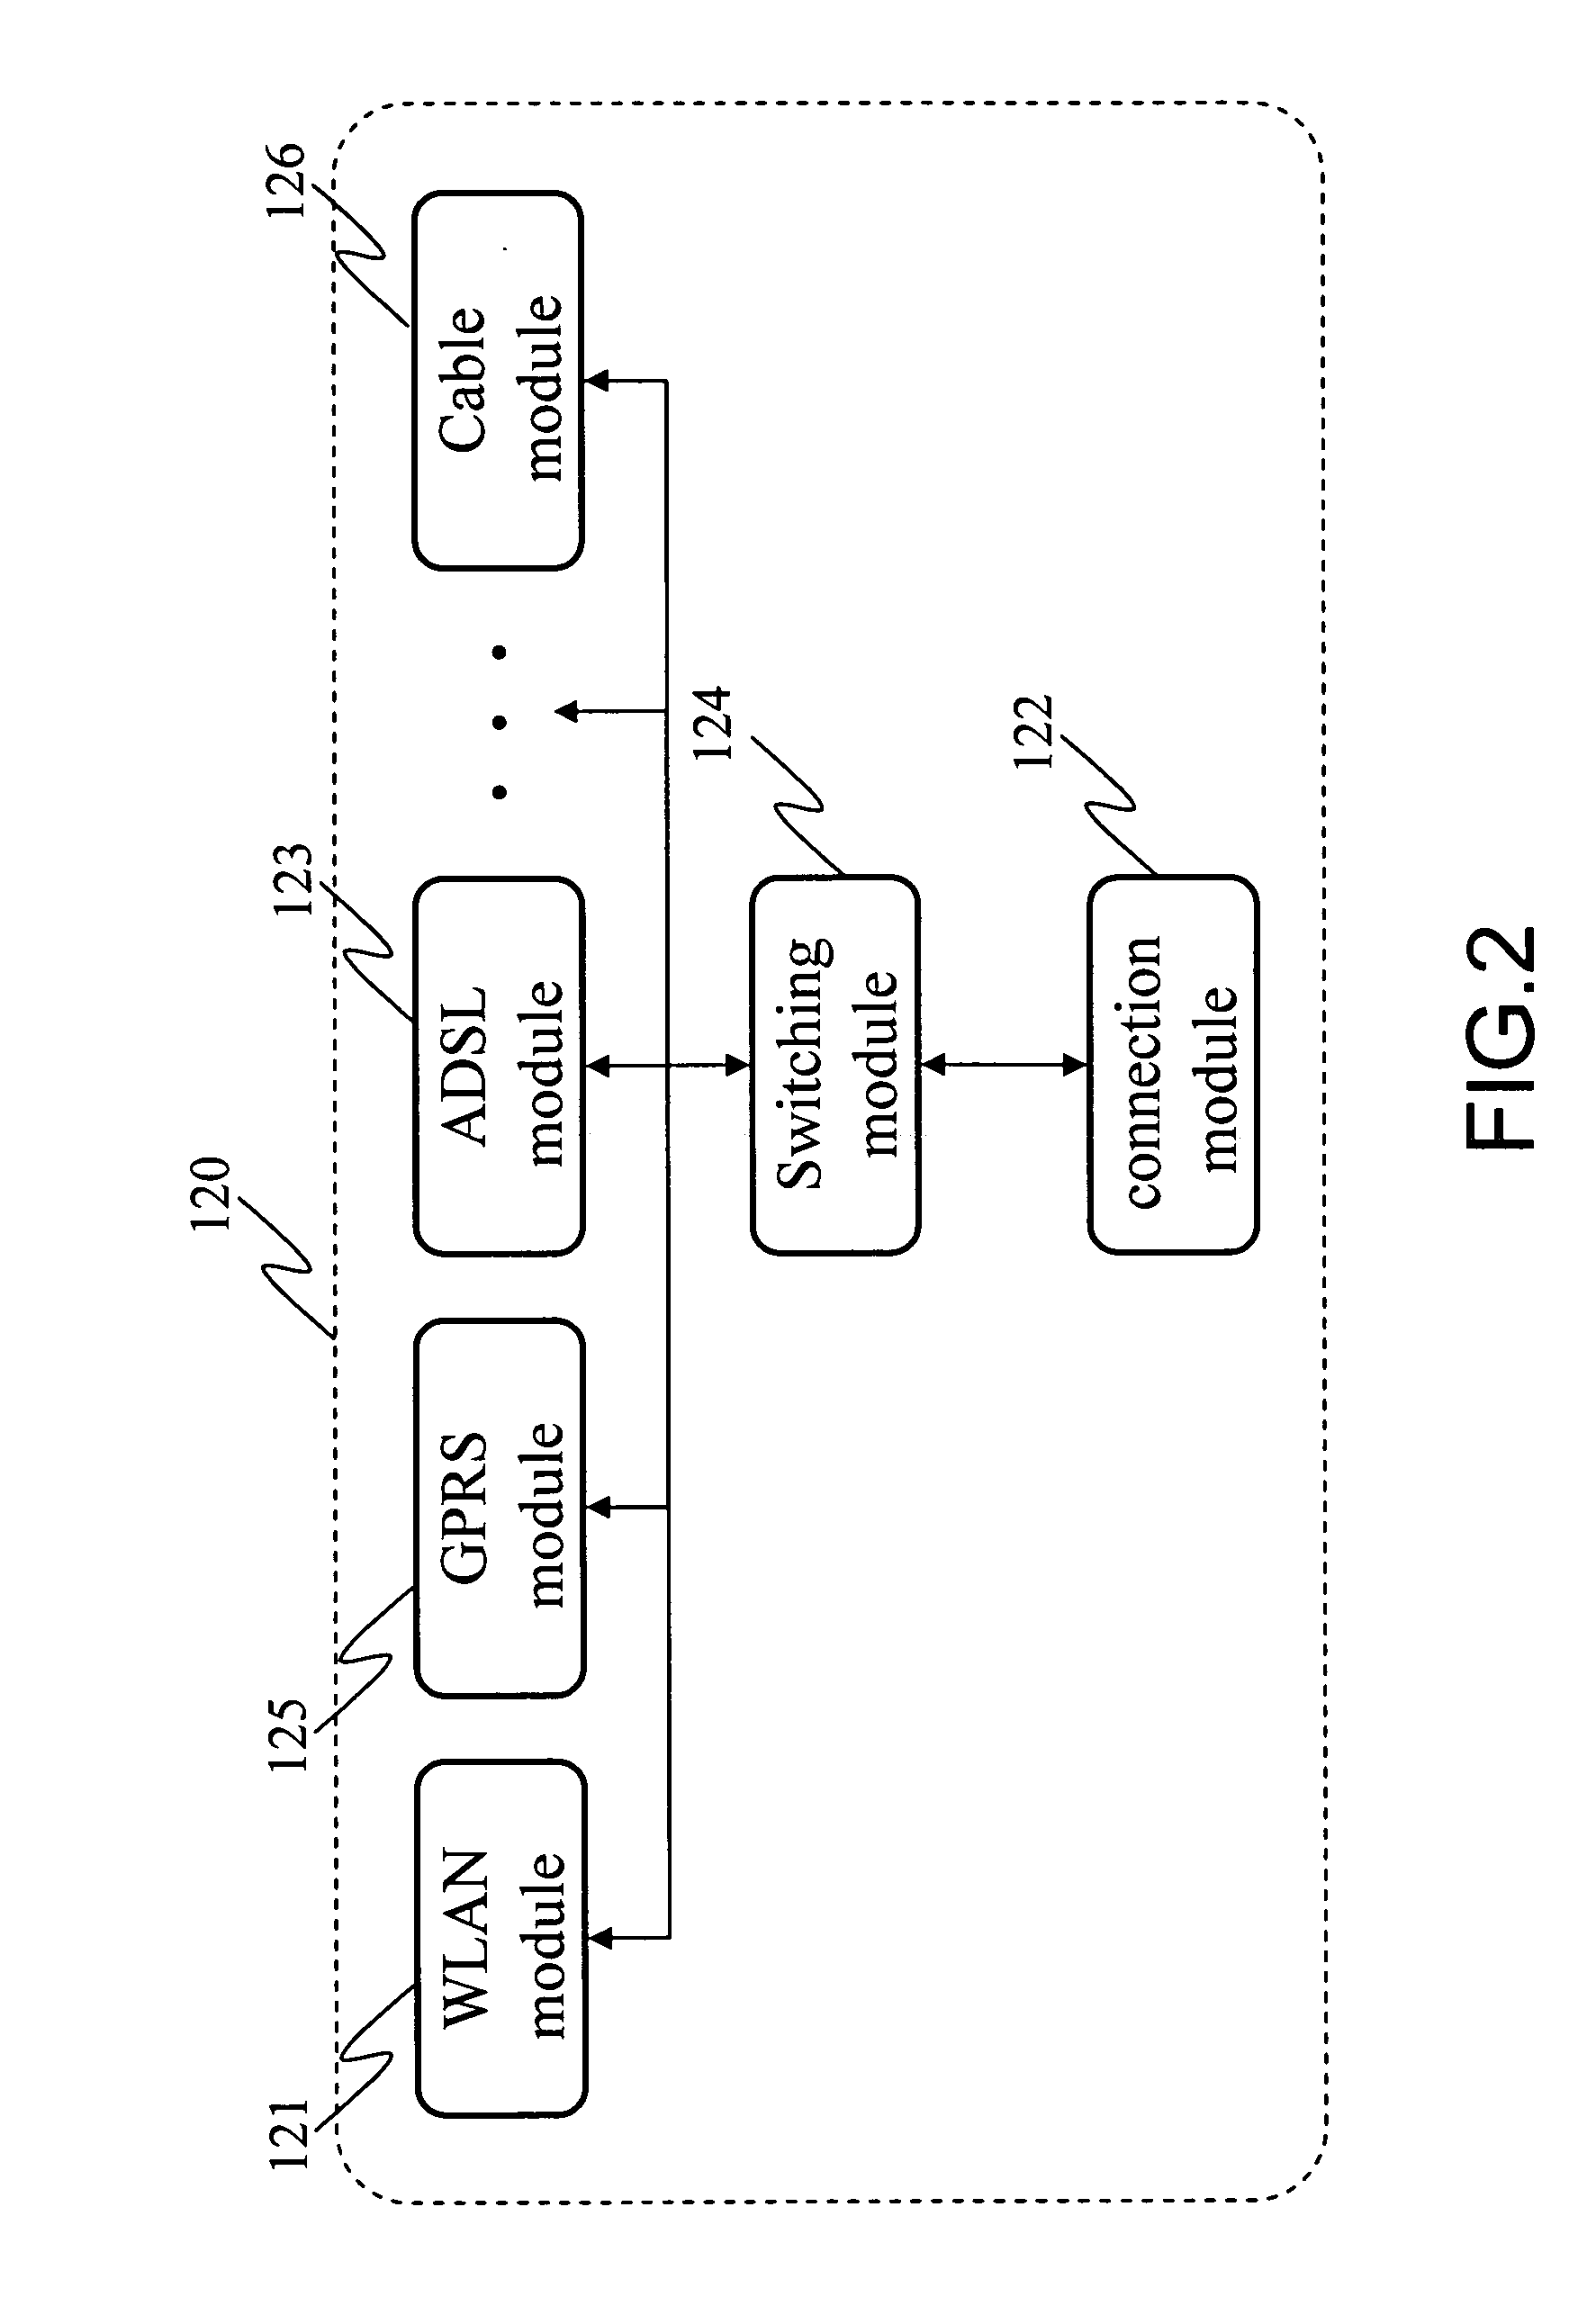 Environment dependent network connection switching setting system and method